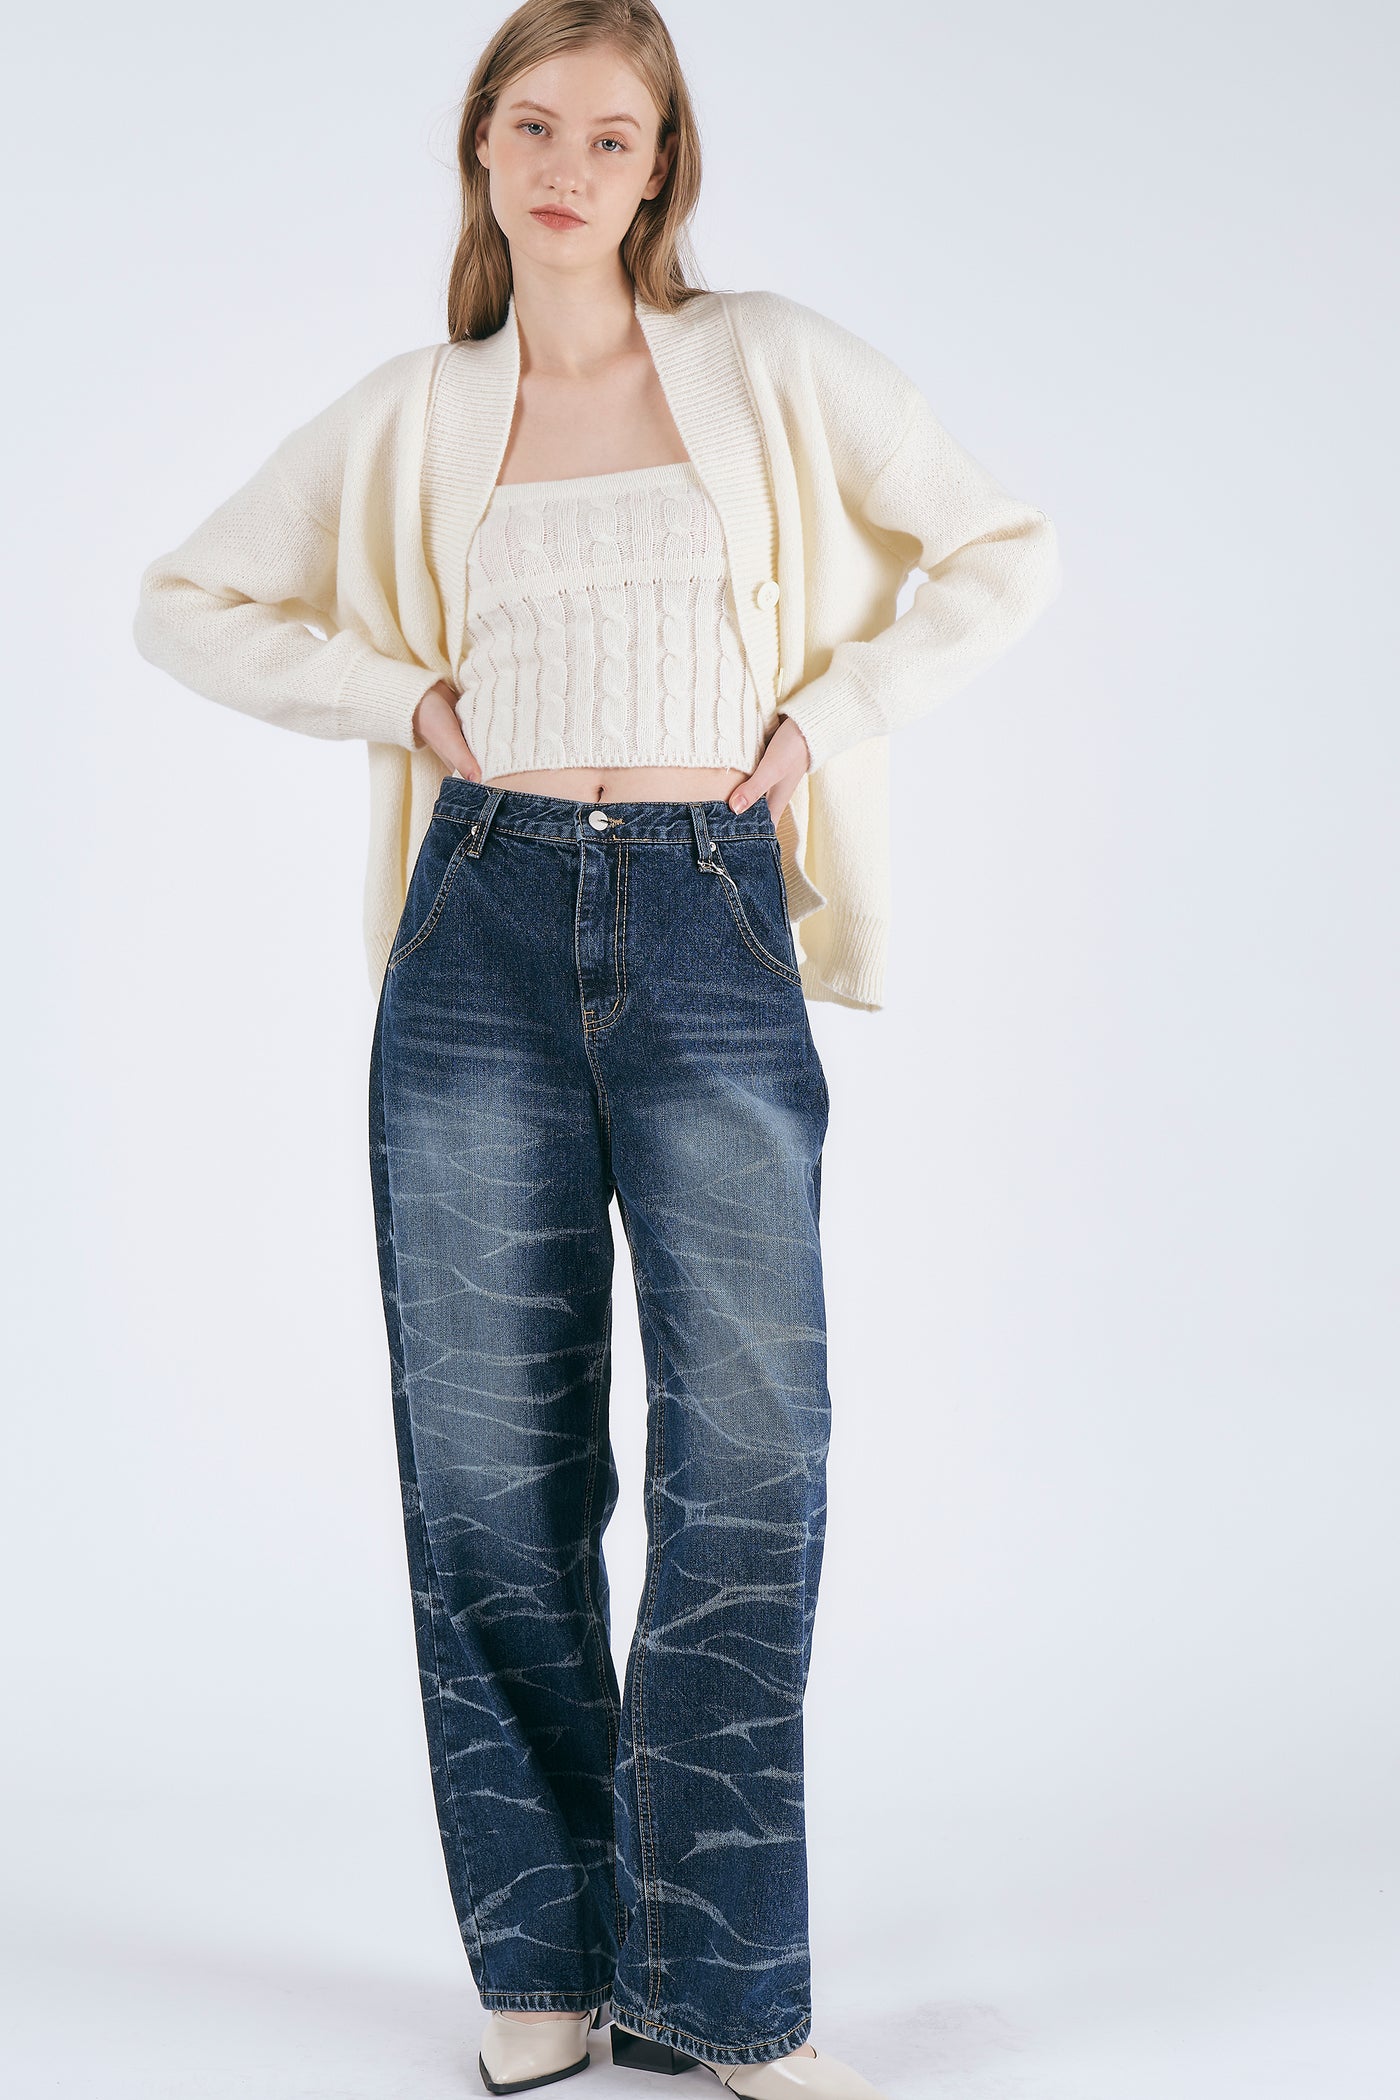 storets.com Daisy Whisker Wash Jeans